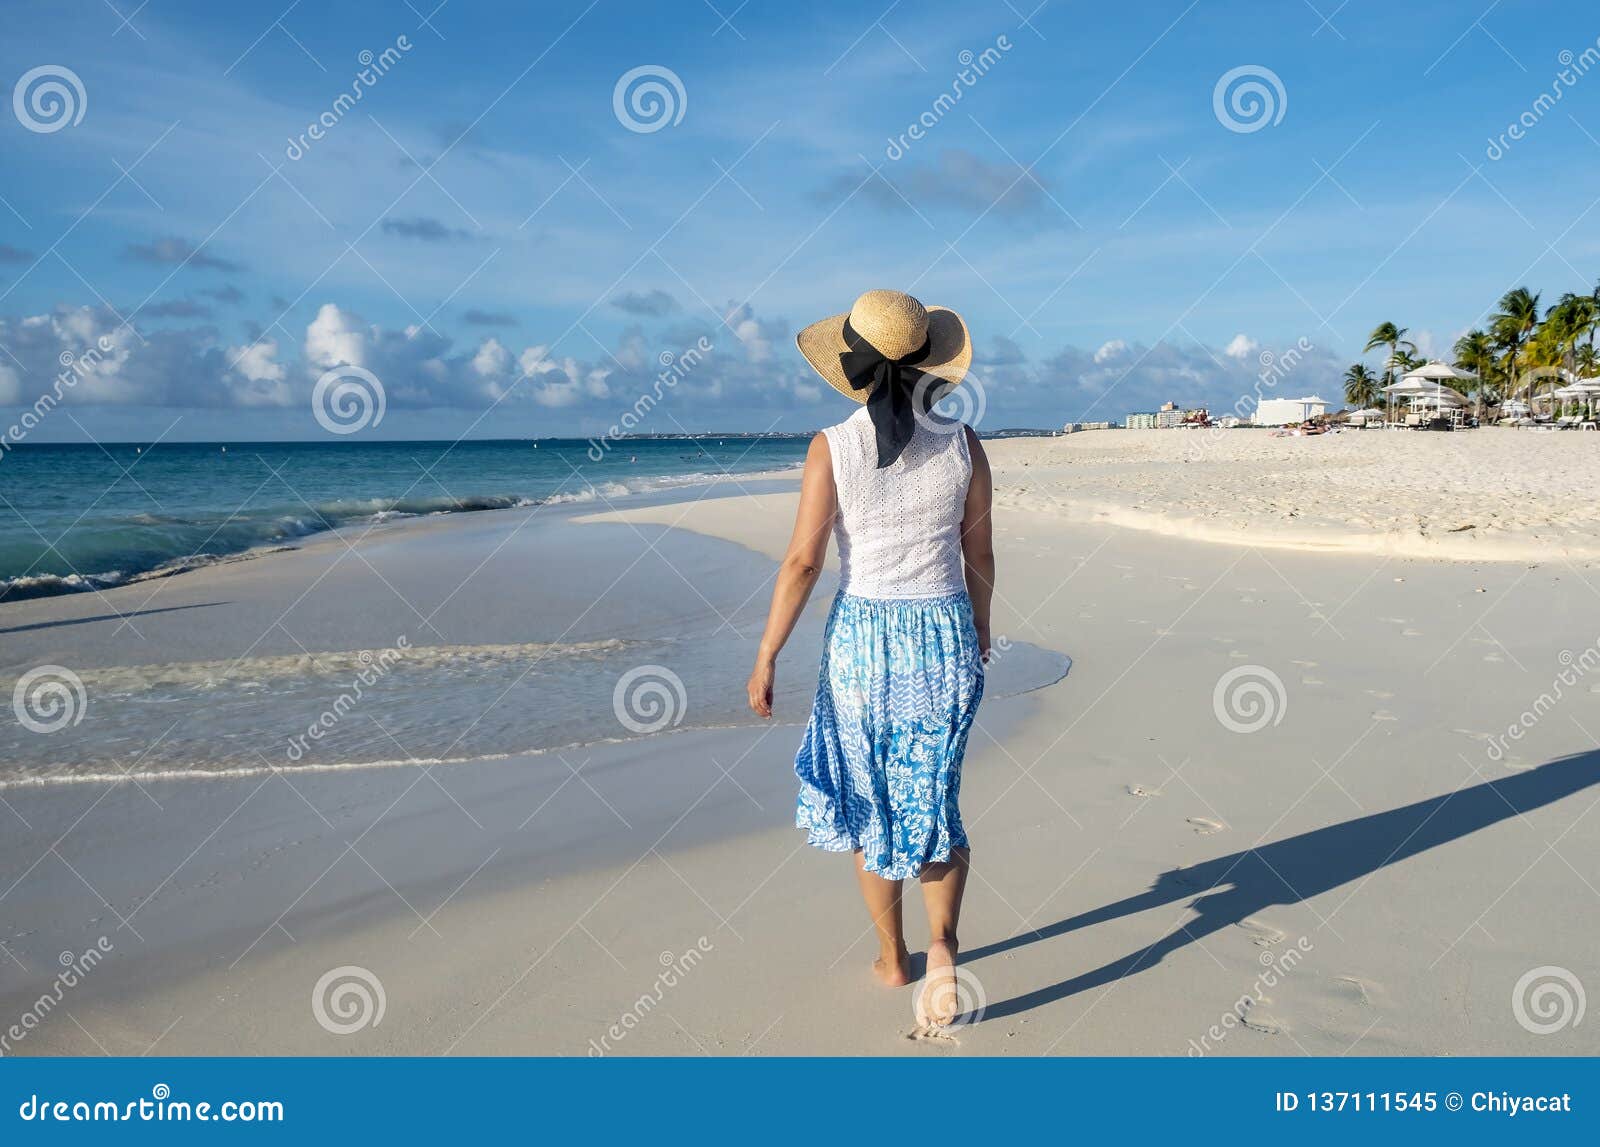 Close Up Of Barefoot Woman Walking On The Beach During 